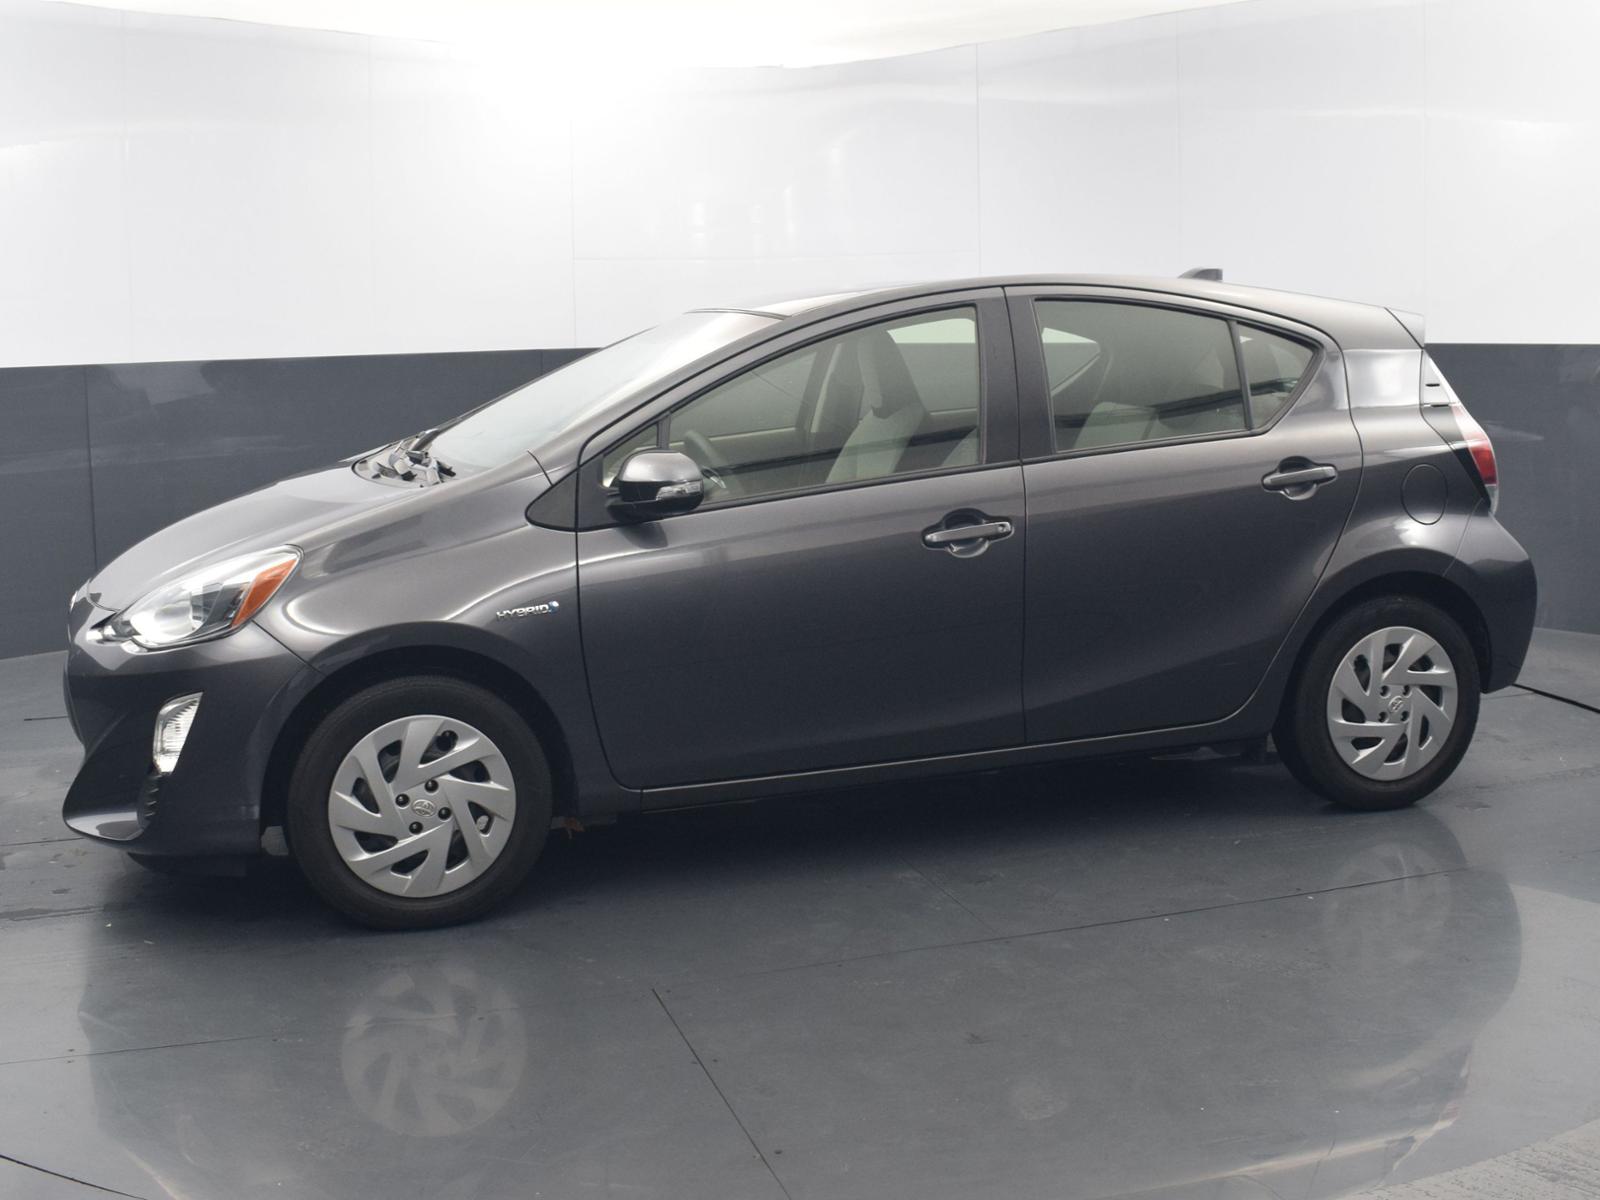 Pre-Owned 2016 Toyota Prius c 5dr HB One 4dr Car in Houston #G1590119 |  Sterling McCall Toyota